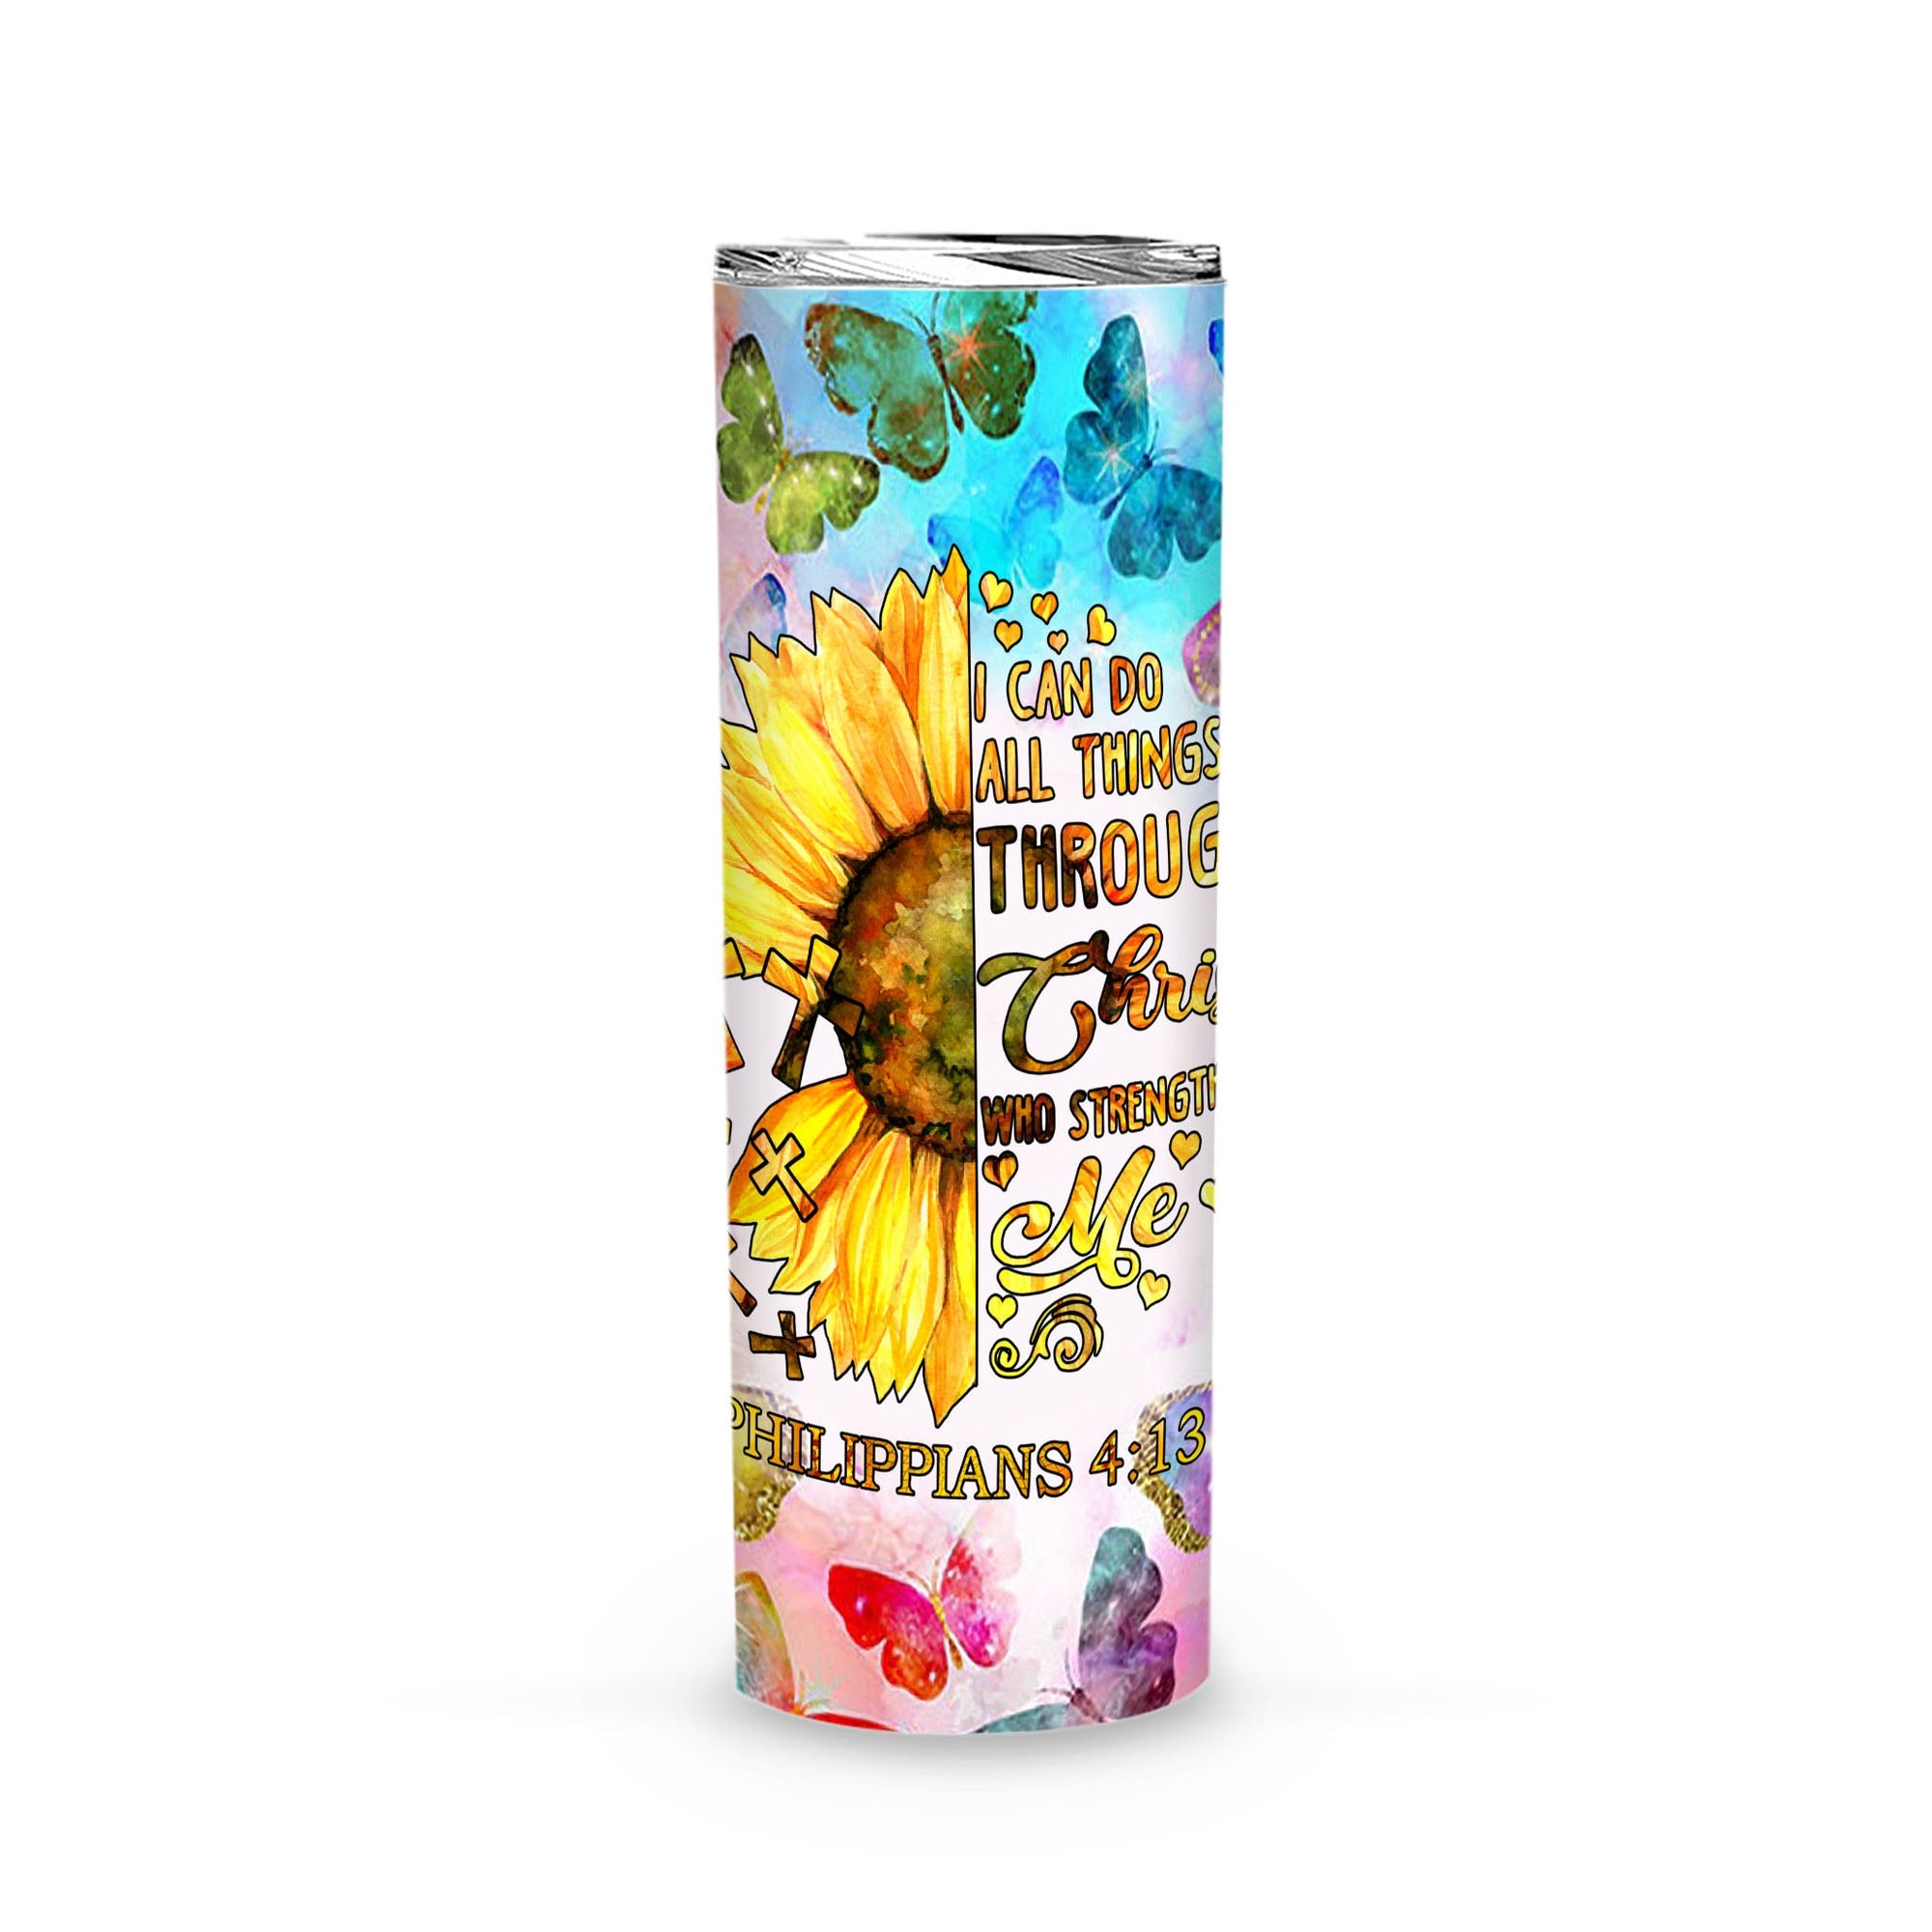 I Can Do All Things Through Christ Who Strengthens Me Philippians 4 13 Bible Skinny Tumbler